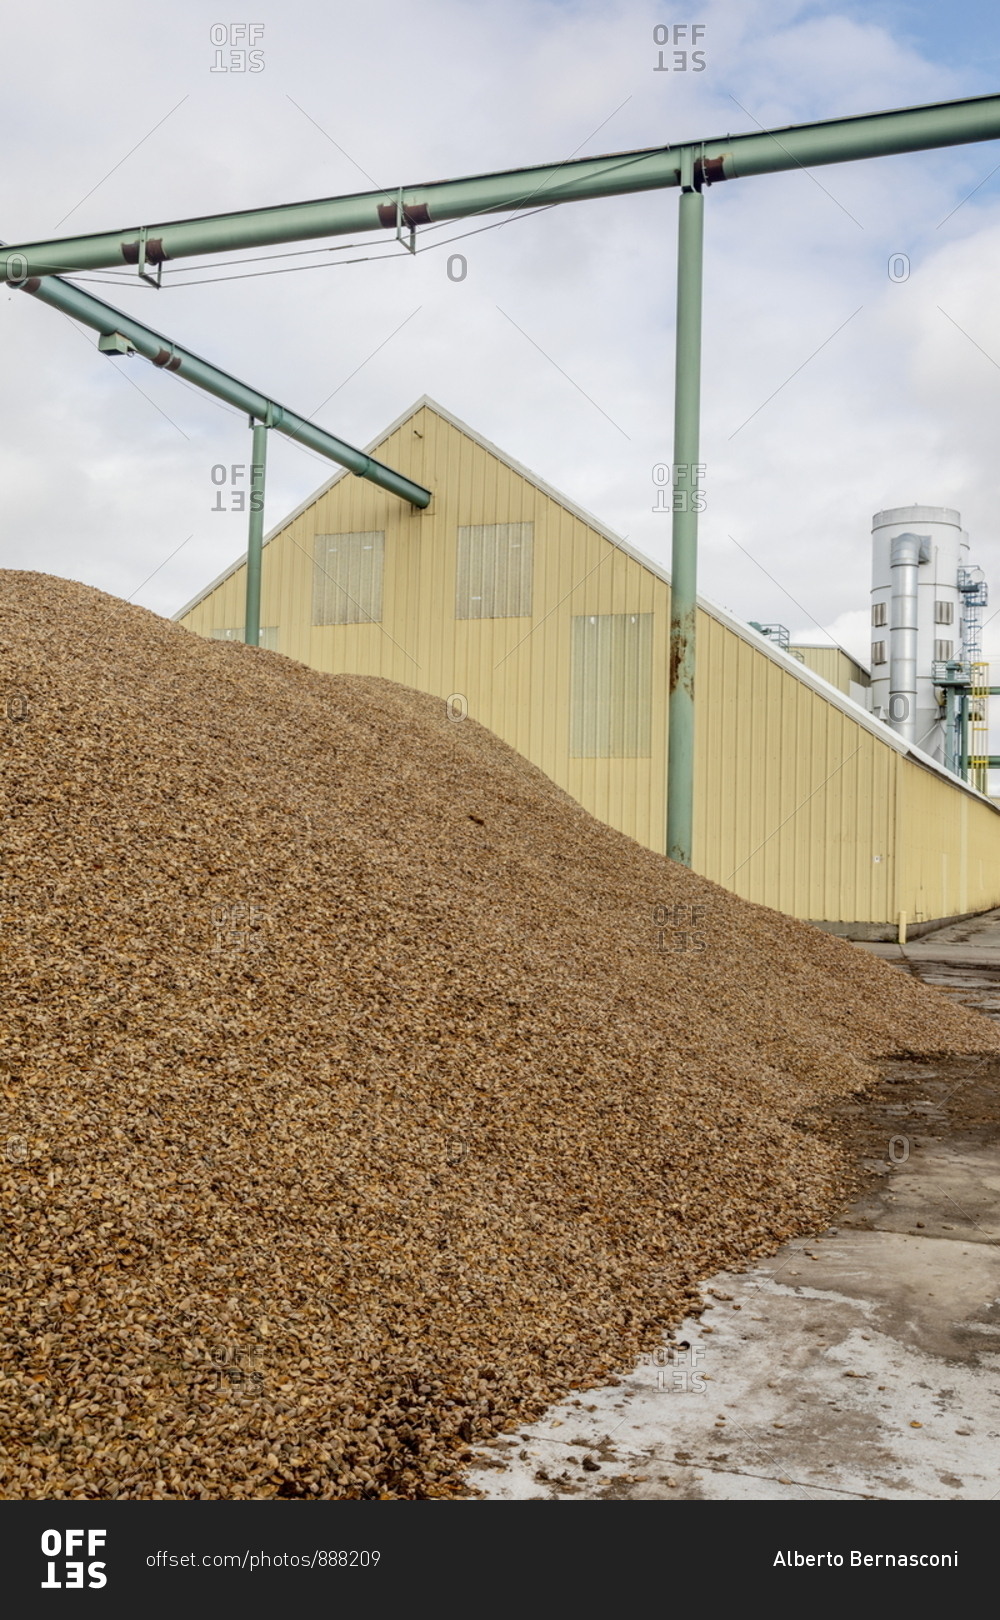 Mounds of almond shells to be recycled and reused in an almond factory